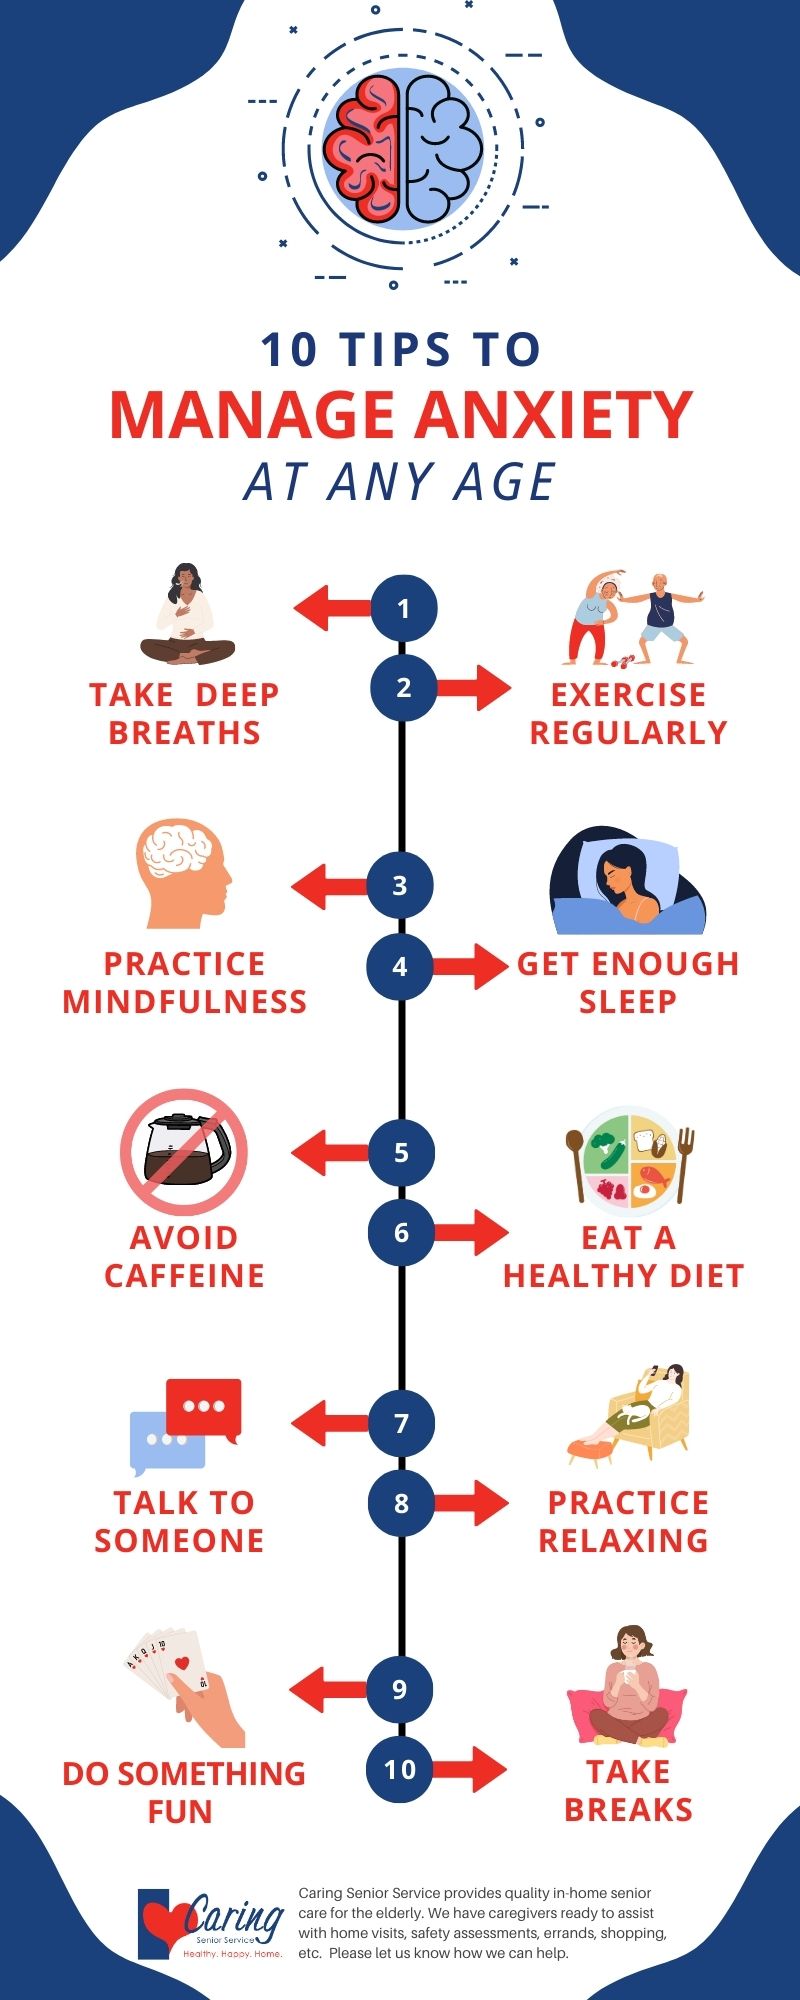 10 Tips to Manage Anxiety at Any Age